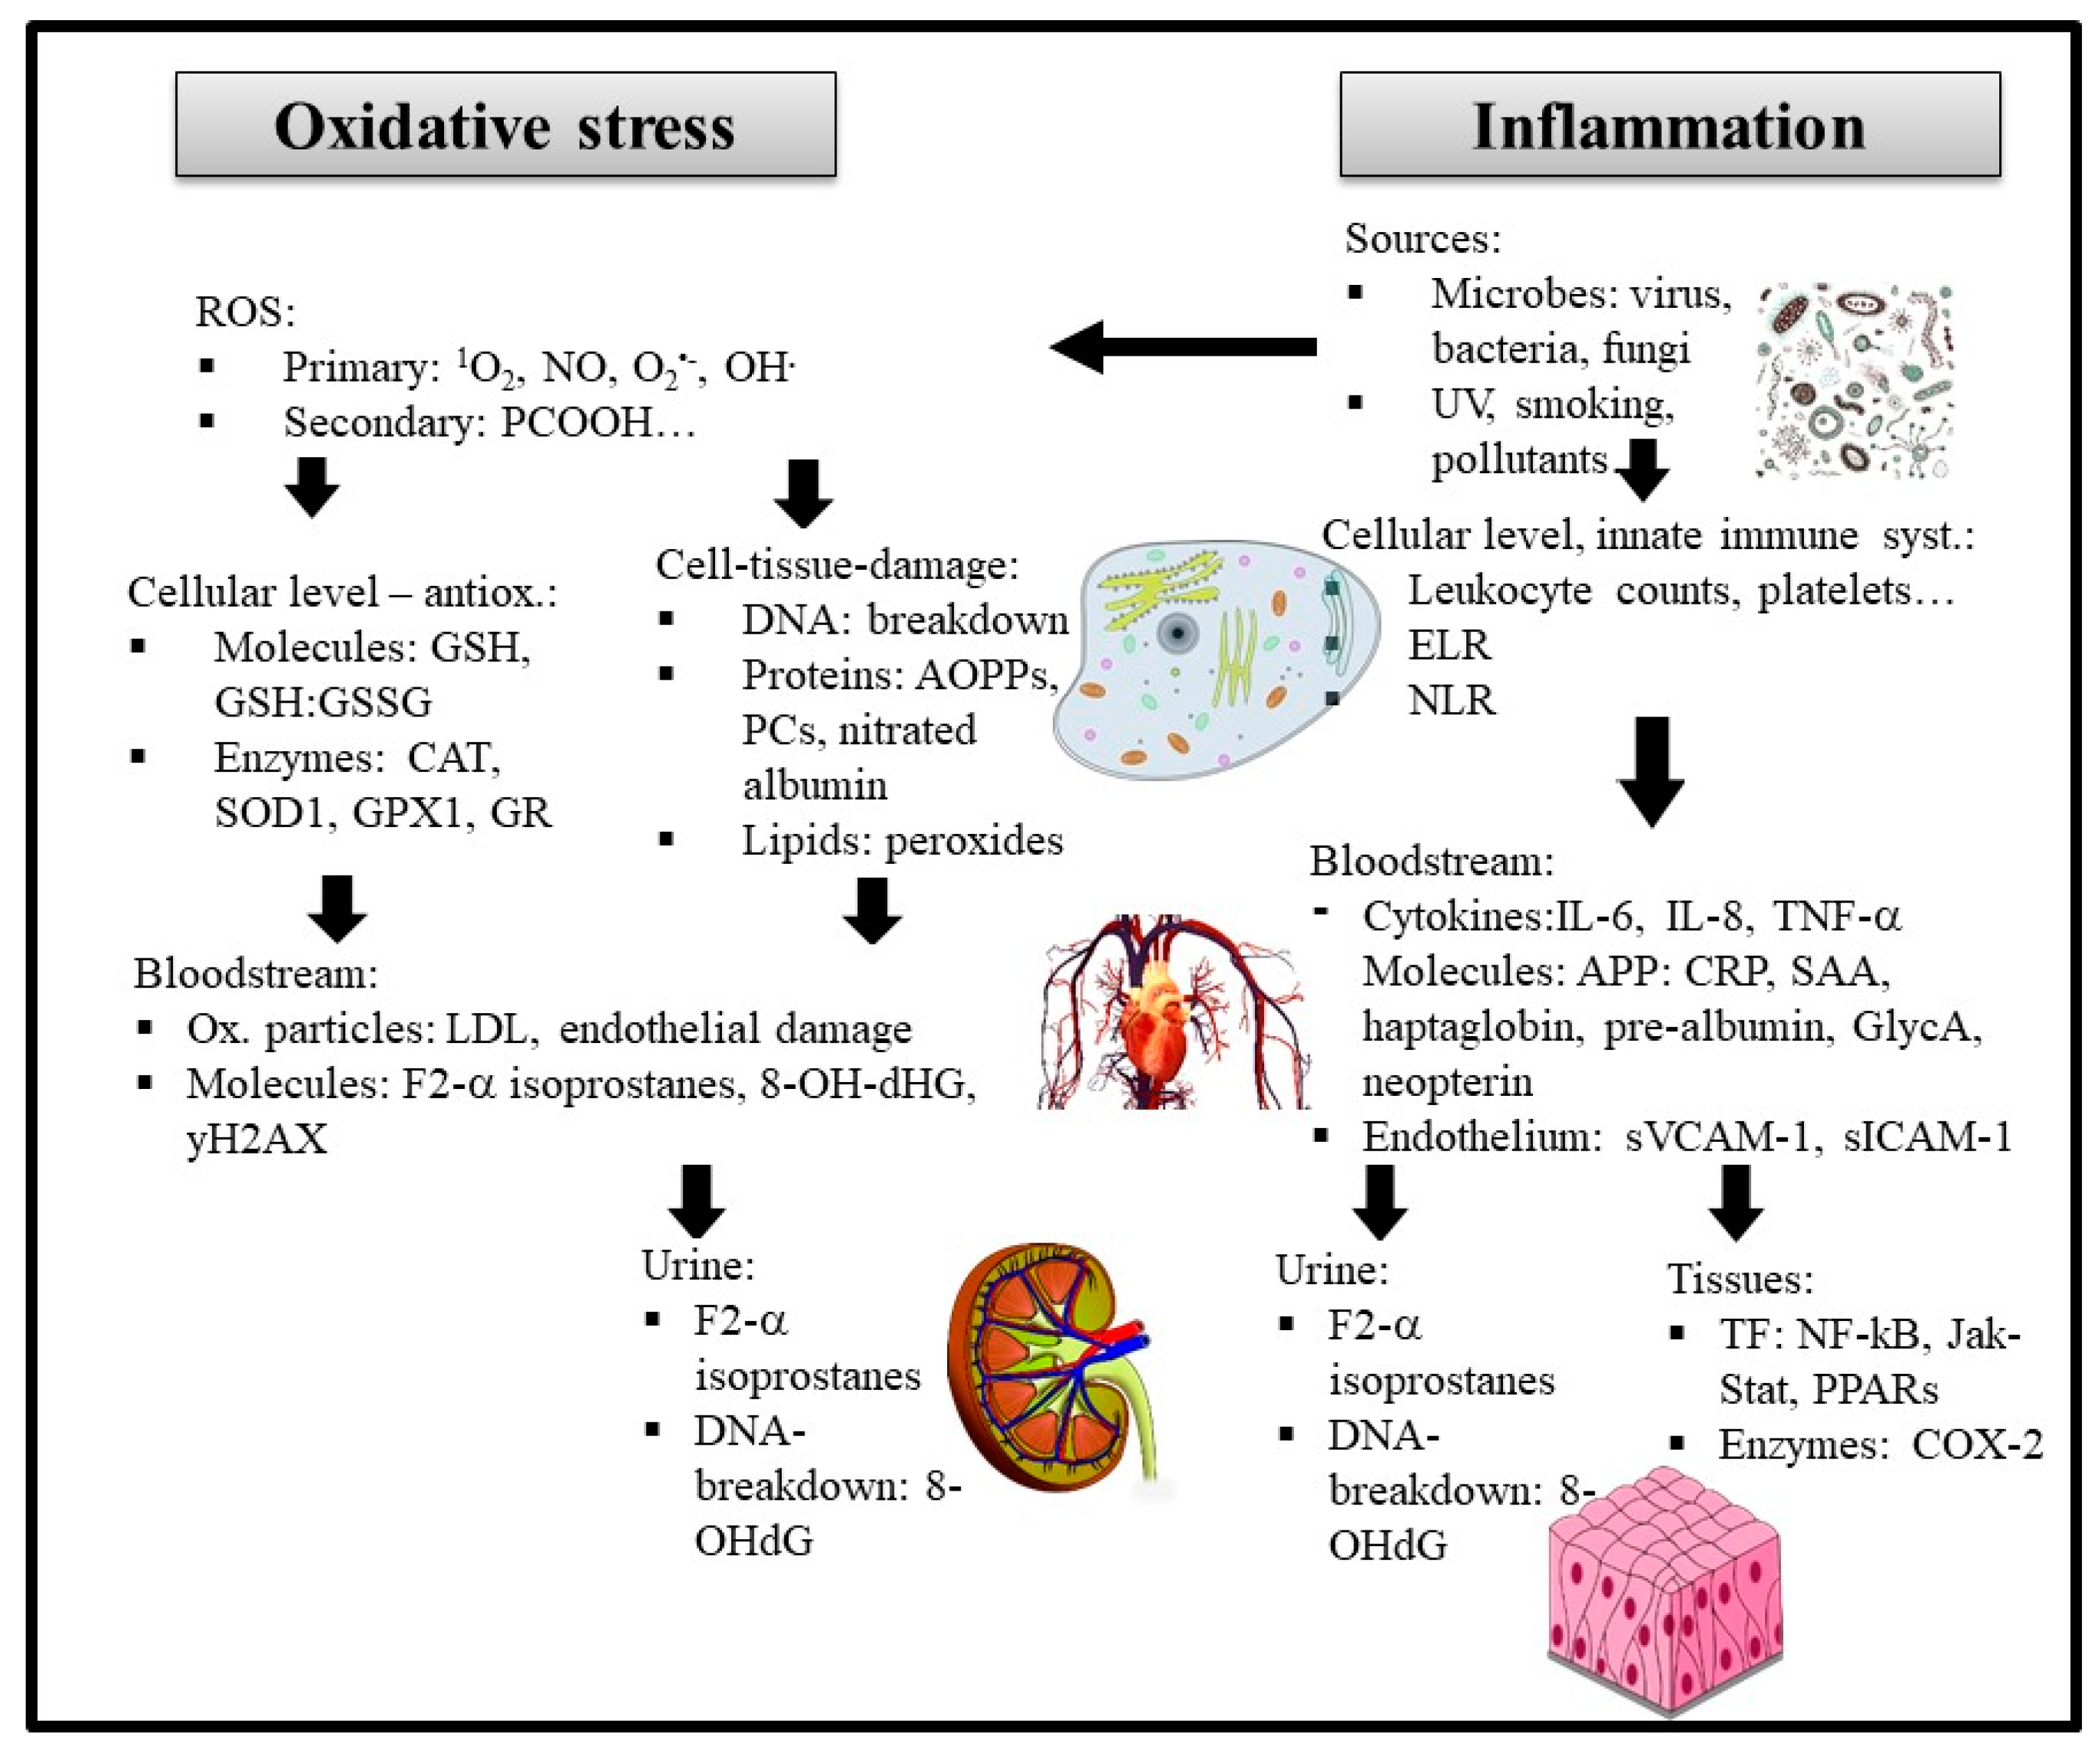 Antioxidants Free Full Text Common And Novel Markers For Measuring Inflammation And Oxidative Stress Ex Vivo In Research And Clinical Practice Which To Use Regarding Disease Outcomes Html